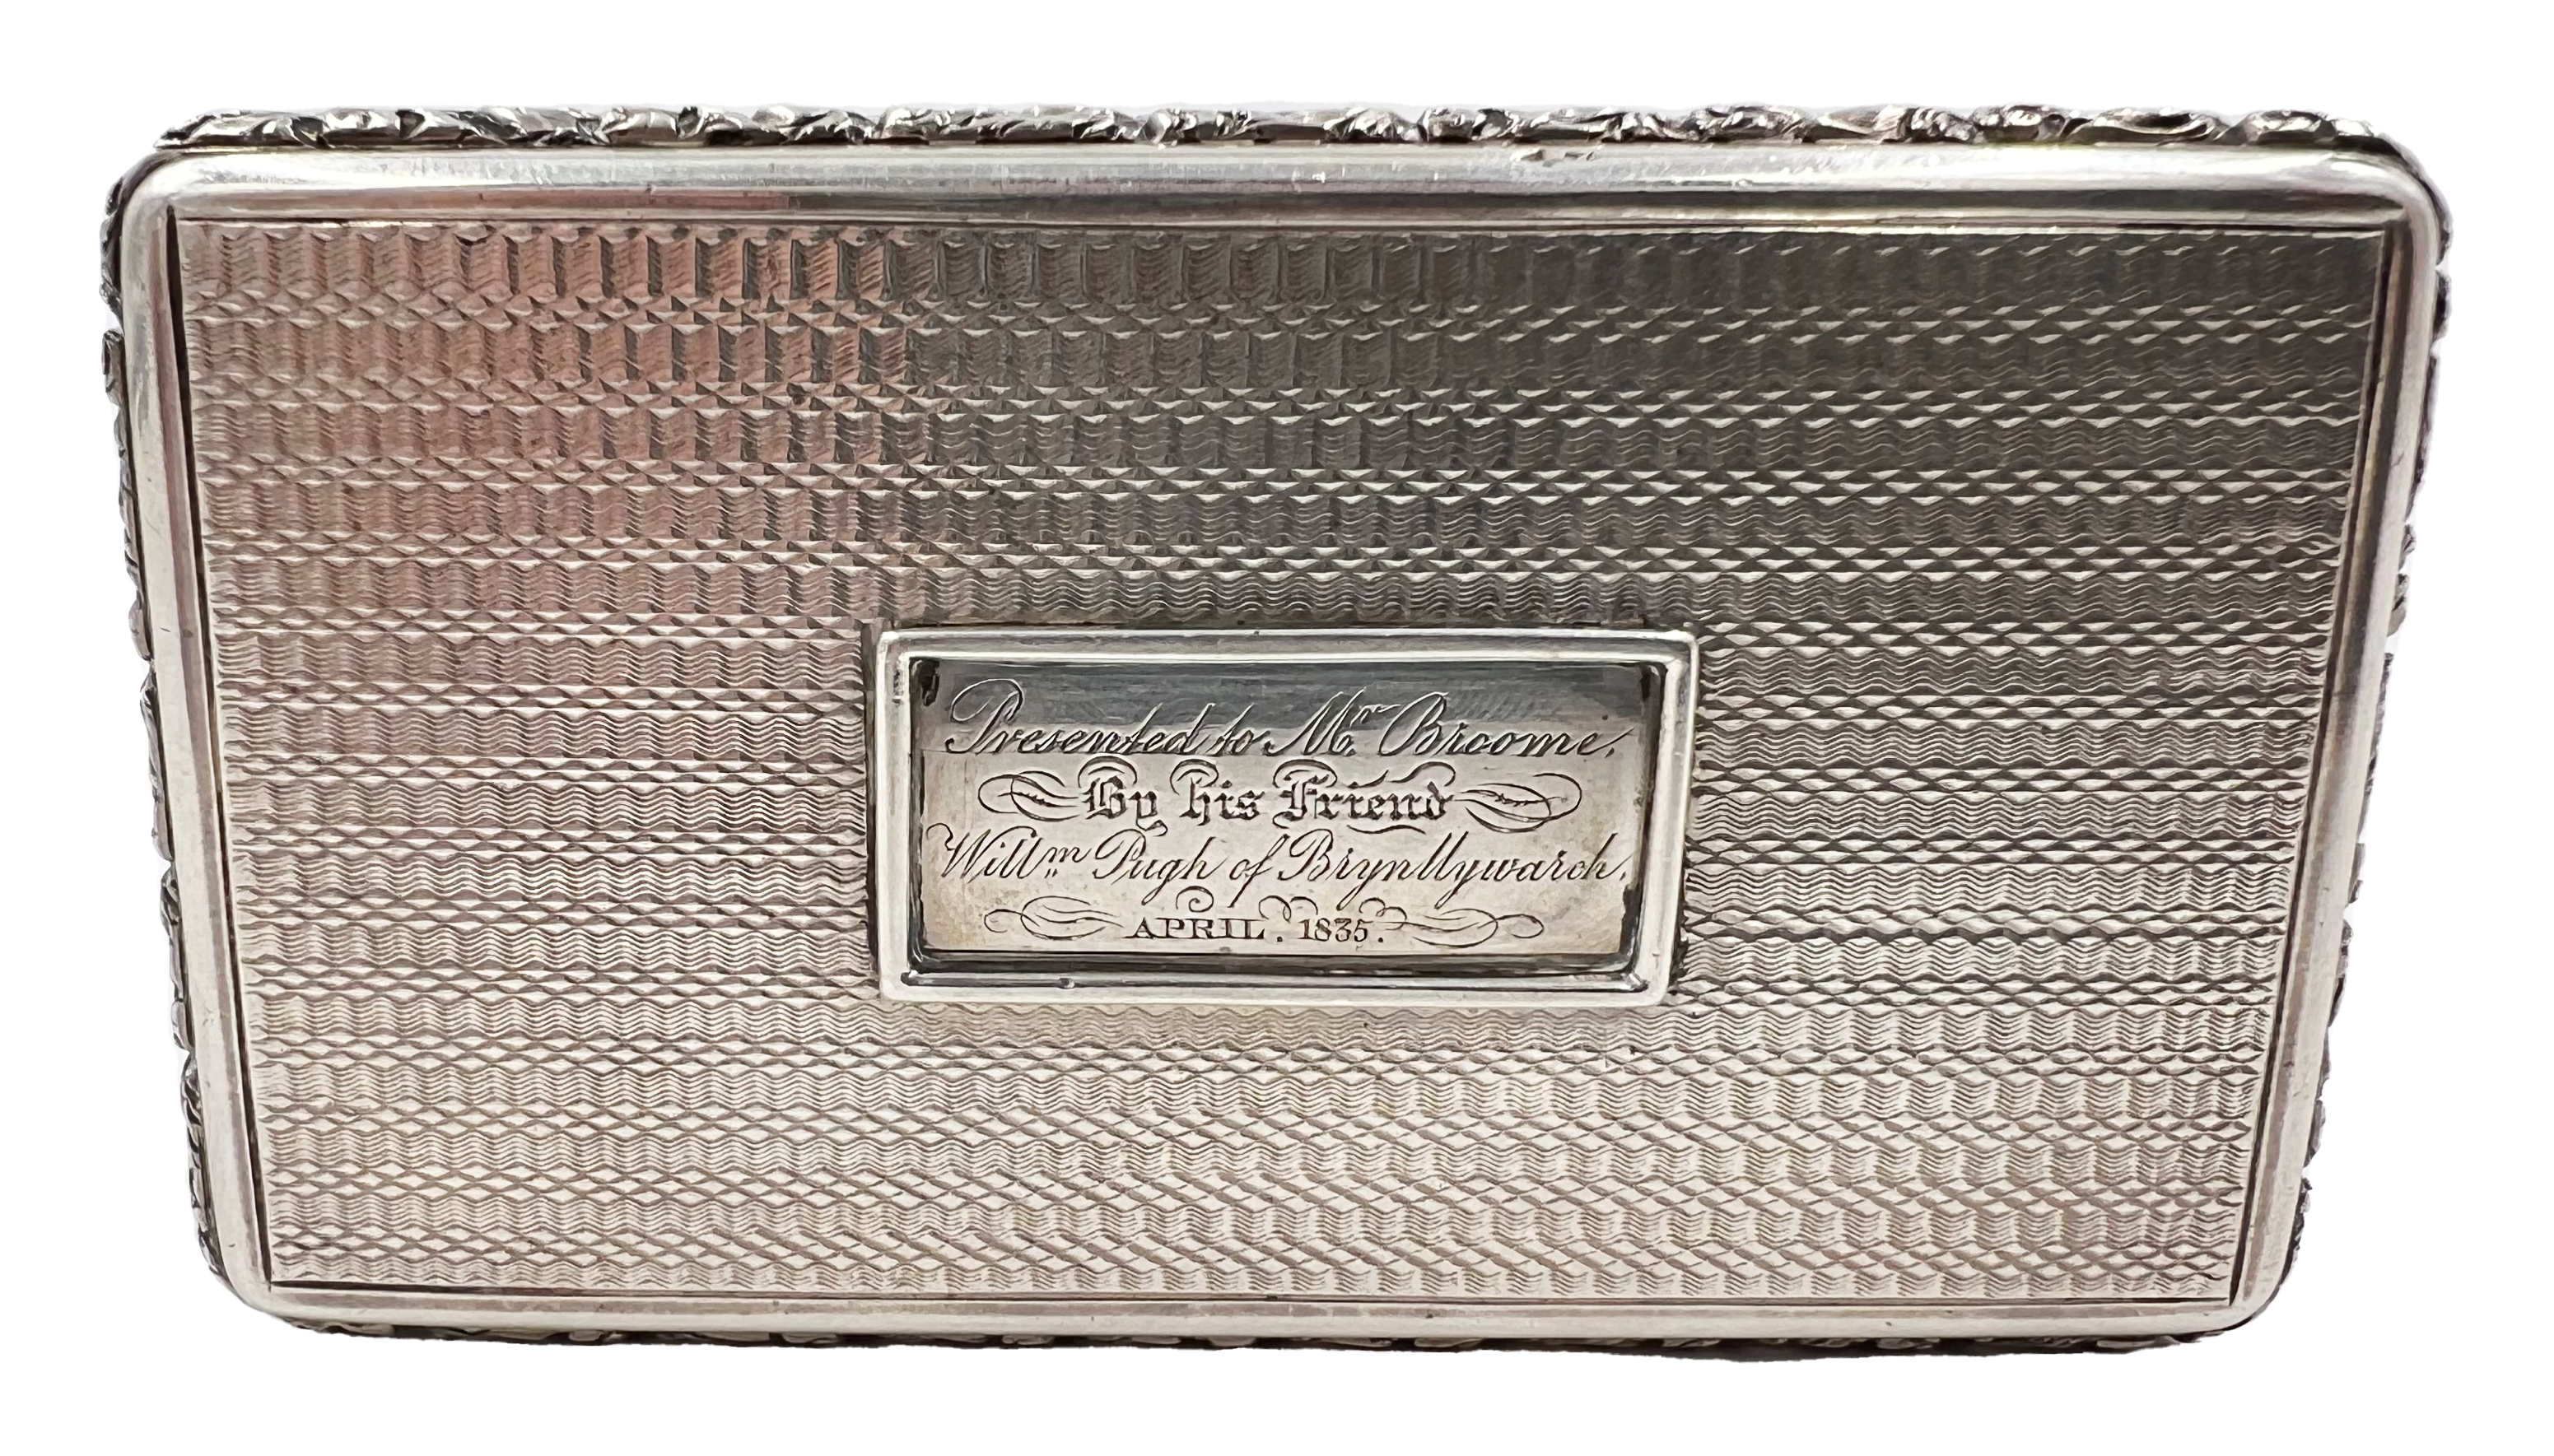 A LARGE SOLID SILVER SNUFF BOX WITH OUTSTANDING DECORATION, BIRMINGHAM, TAYLOR & PERY, 1830 - Image 2 of 6